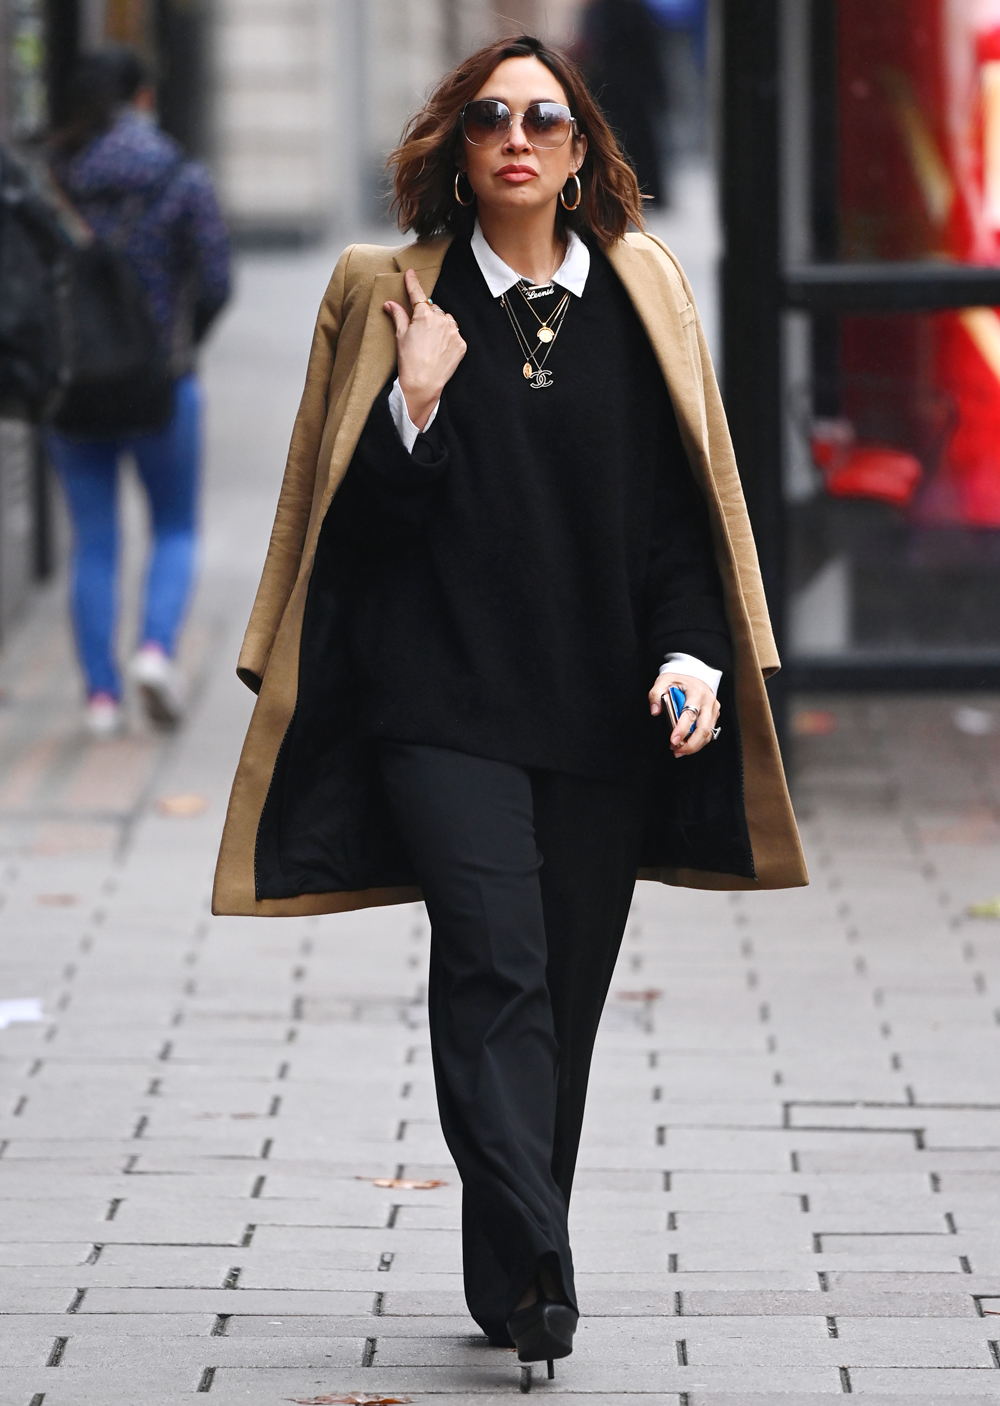 Myleene Klass out and about in London | About Her